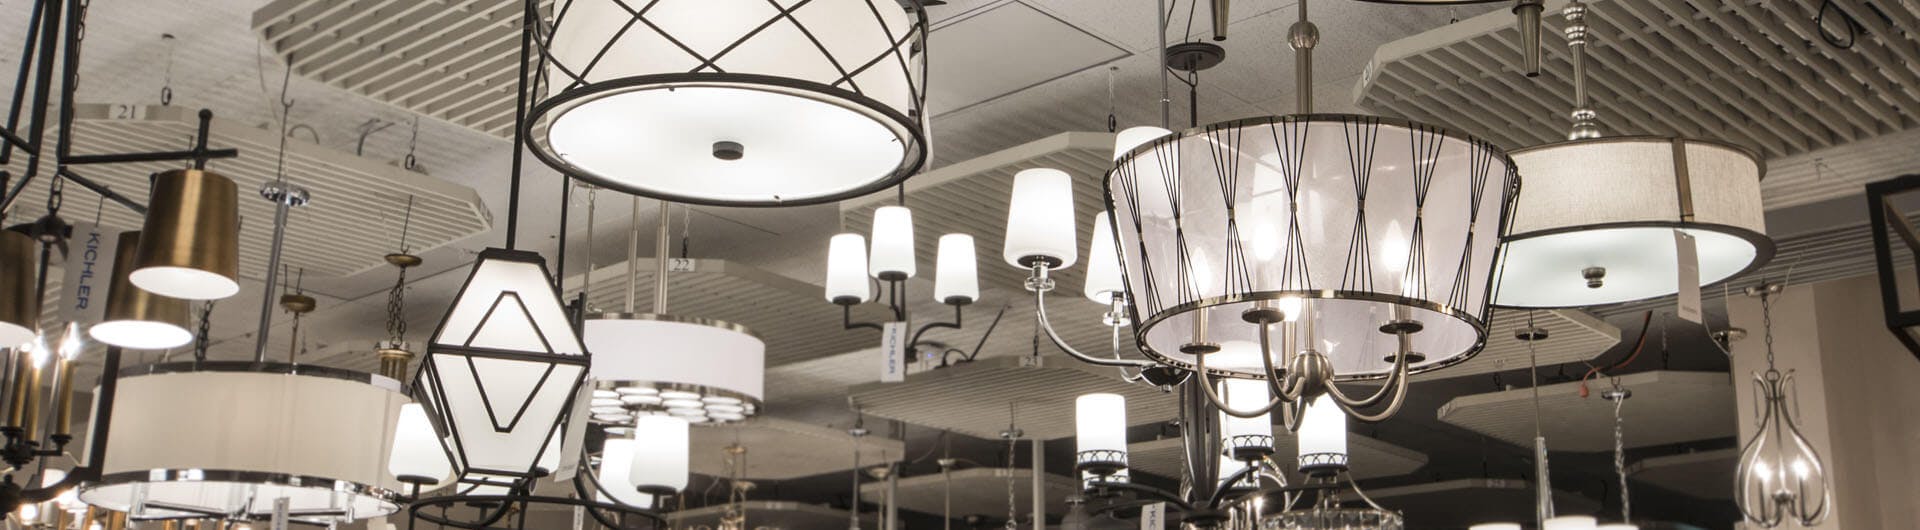 Variety of chandeliers hanging from a showroom ceiling